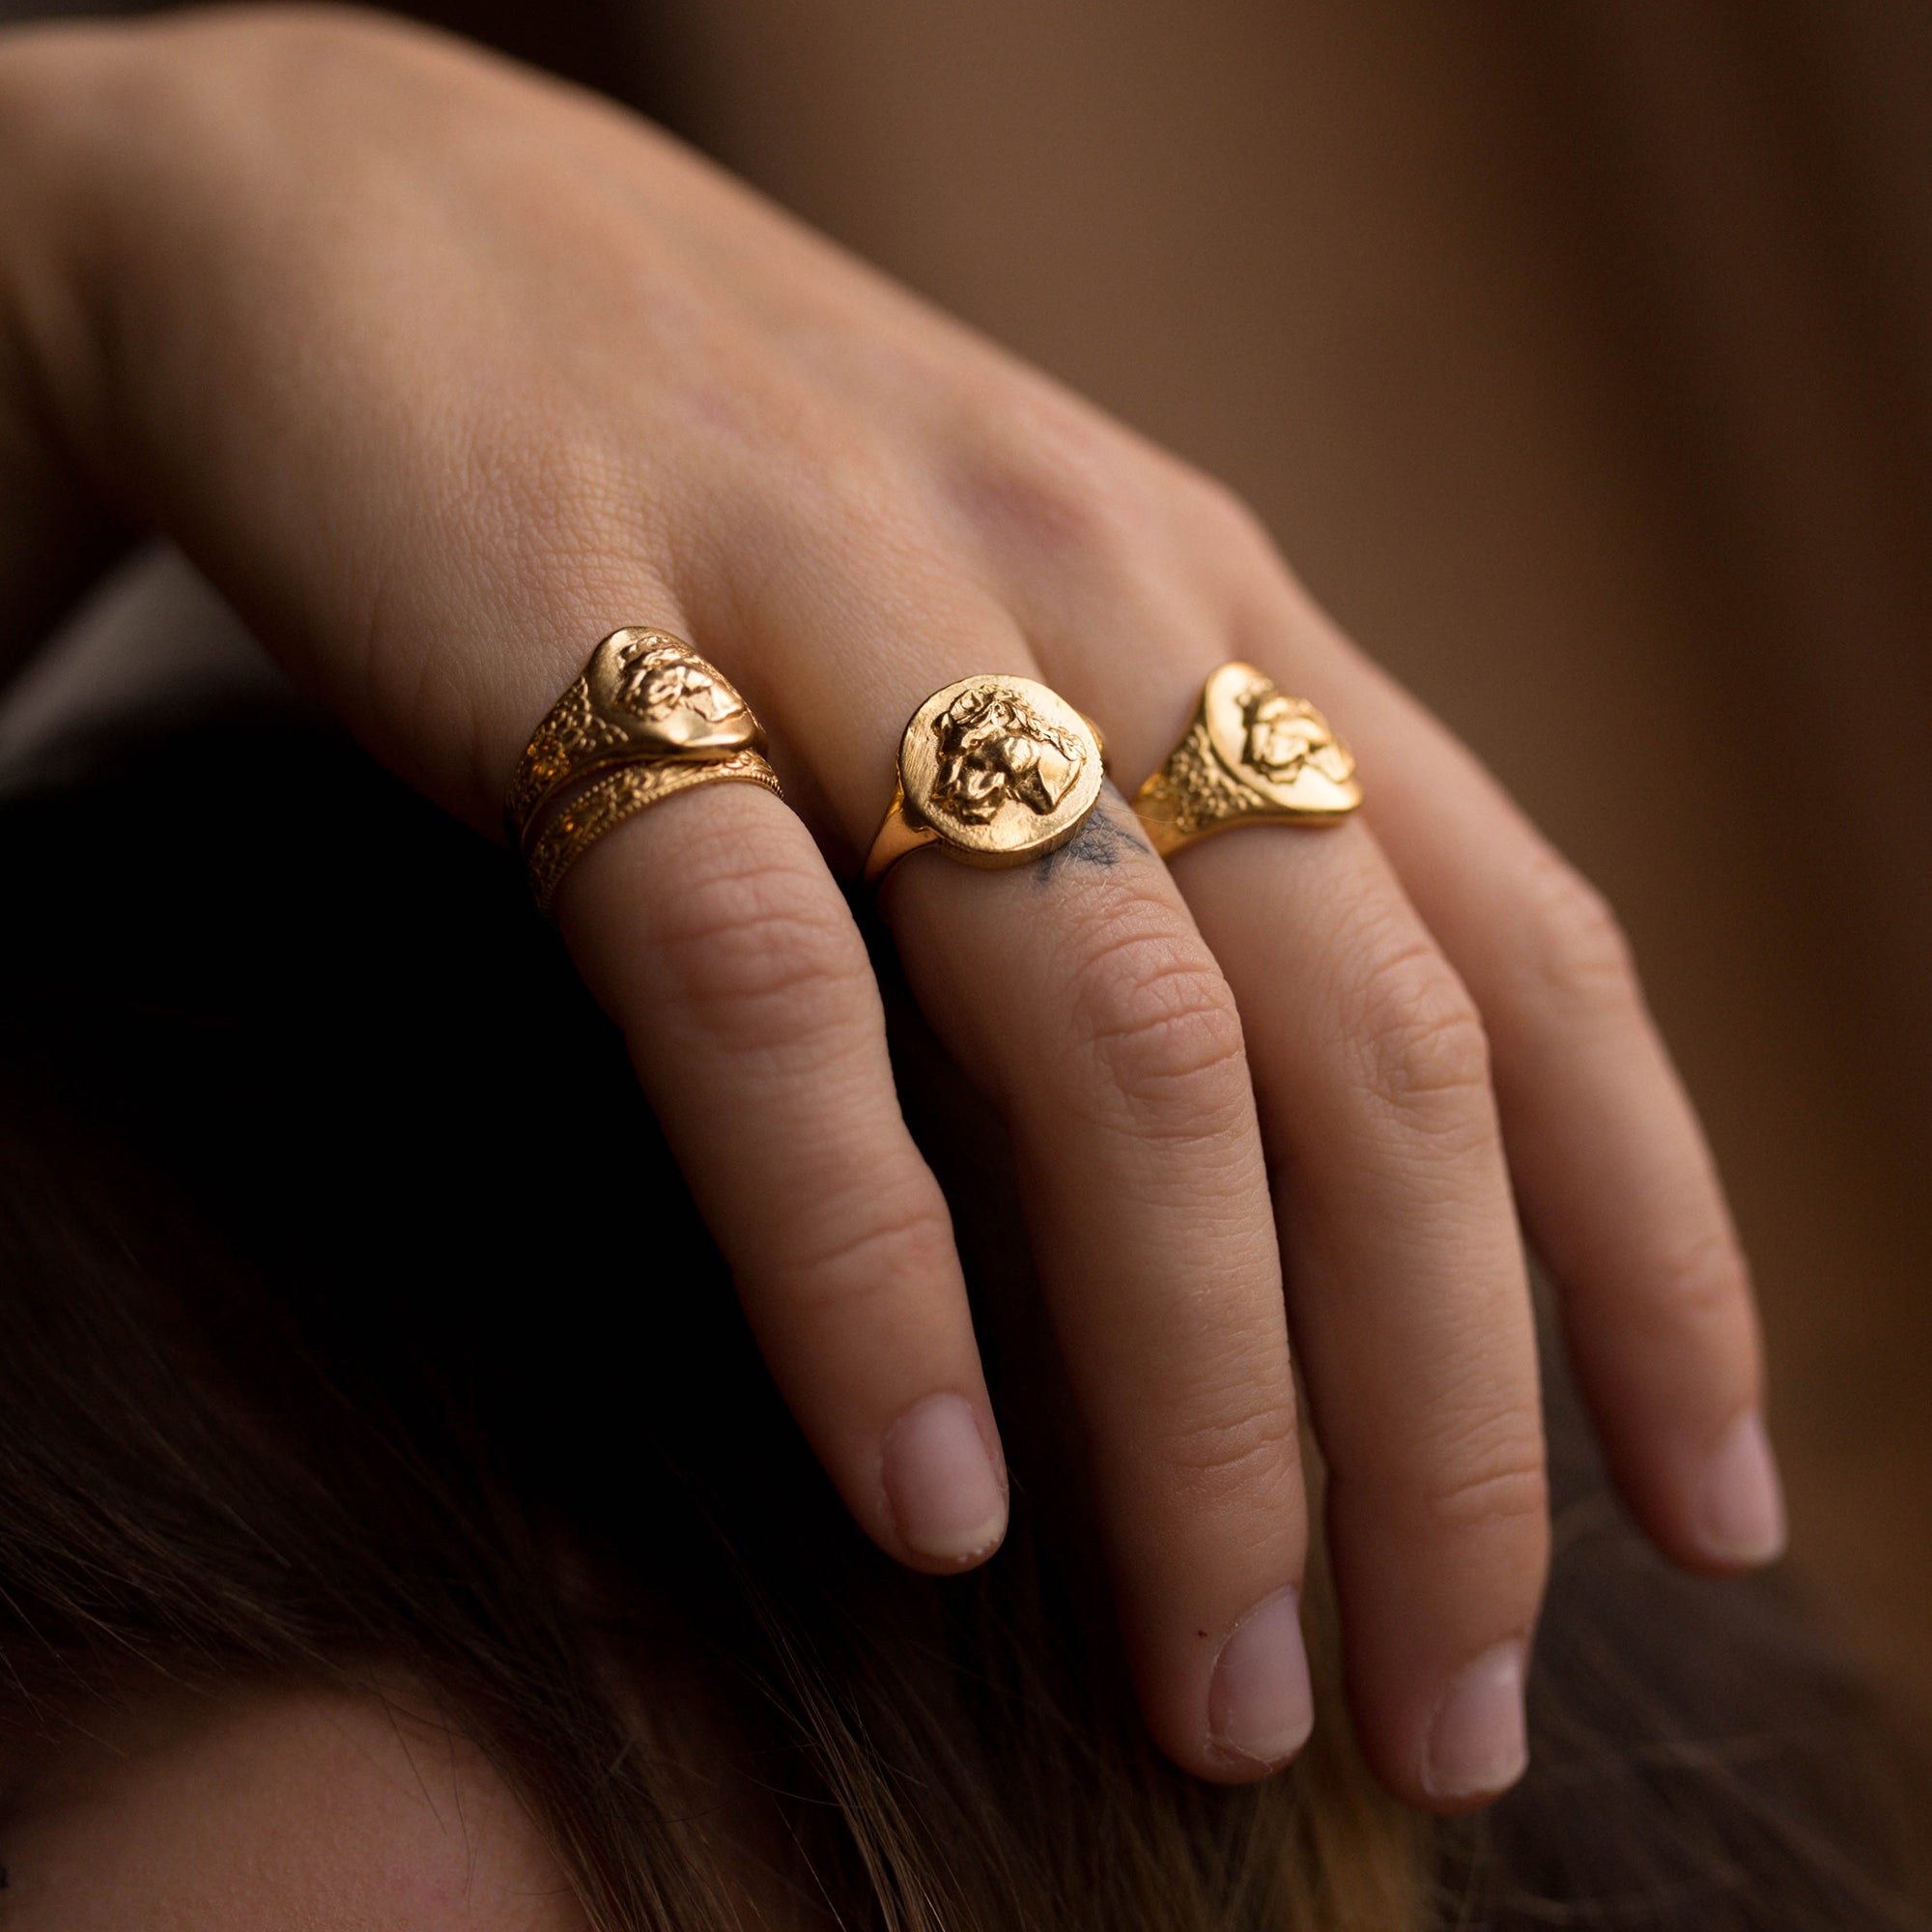 LIONESS COIN RING